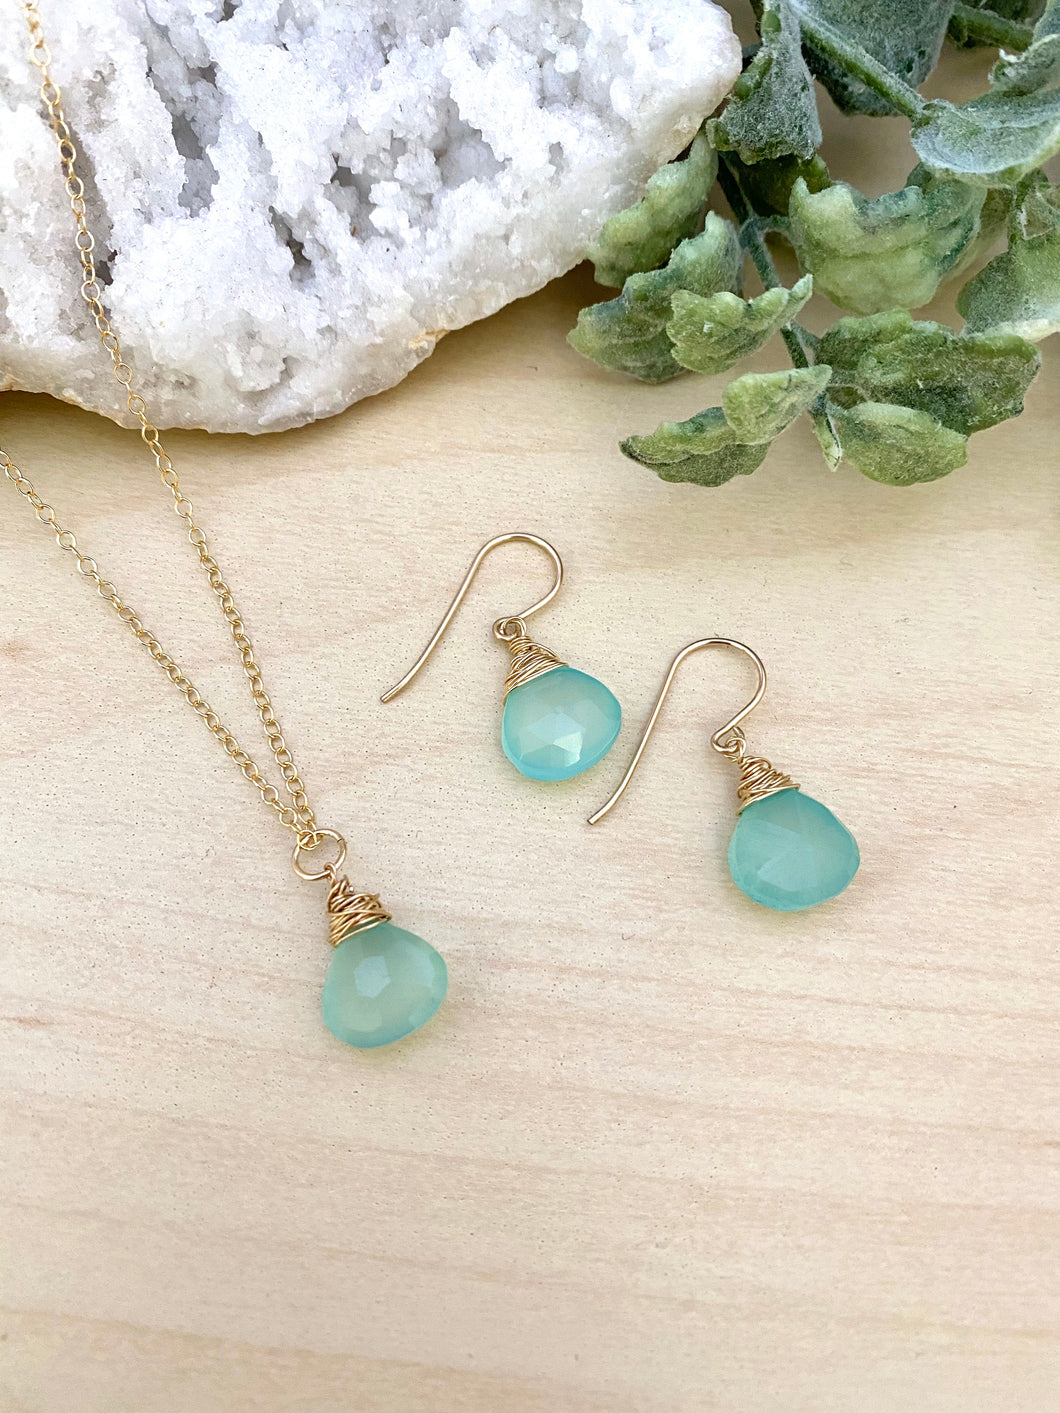 Aqua Chalcedony Necklace and Earring Gift Set in 14k Gold Fill